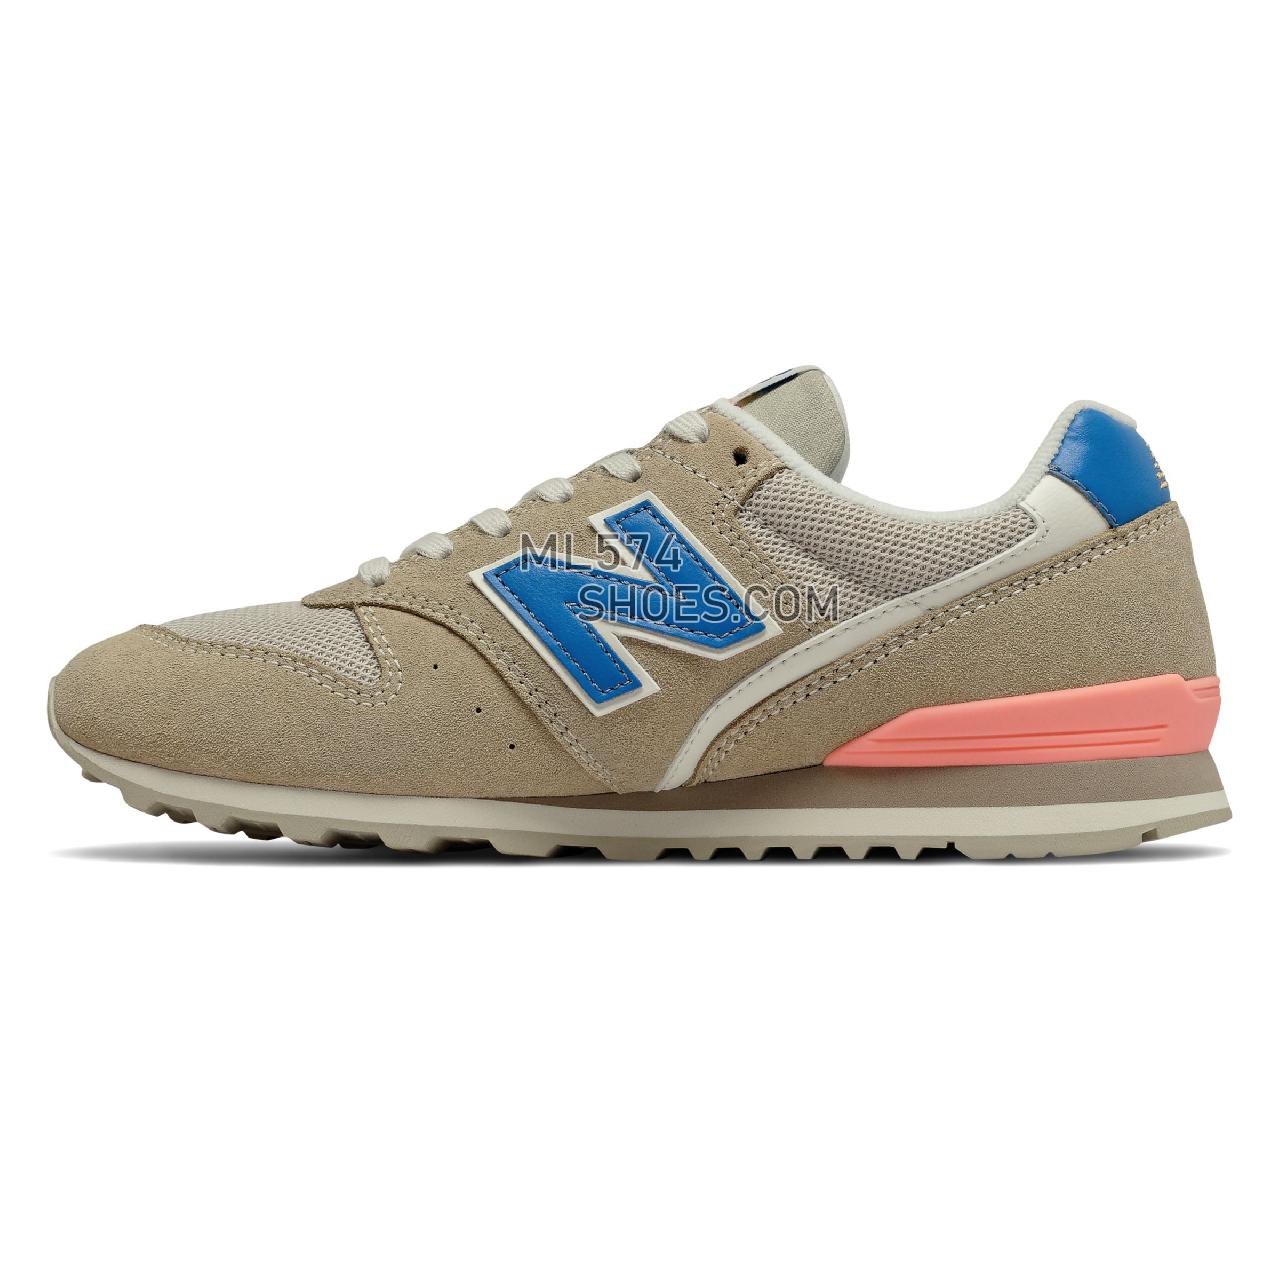 New Balance 996 - Women's 996 Classic - Incense with Neo Classic Blue - WL996COK